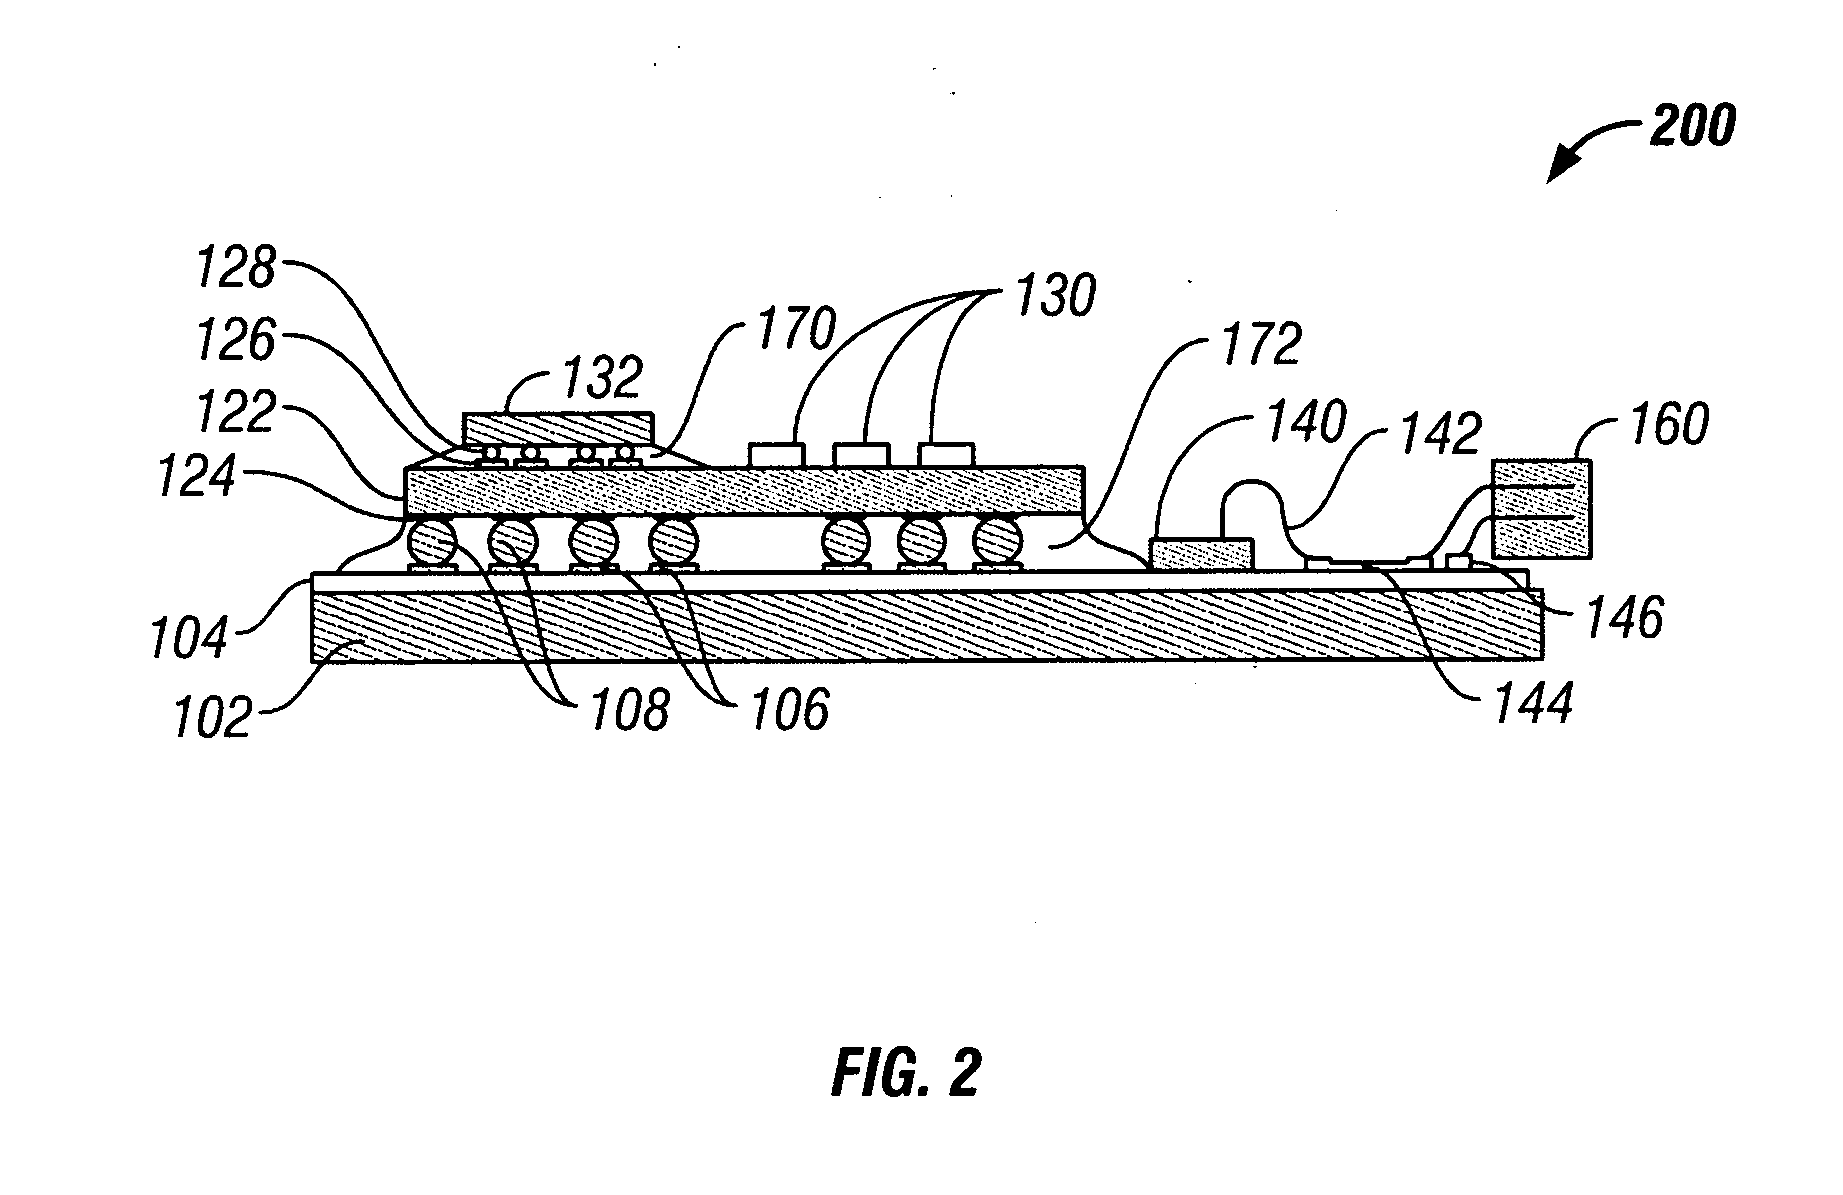 Electronic assembly including multiple substrates